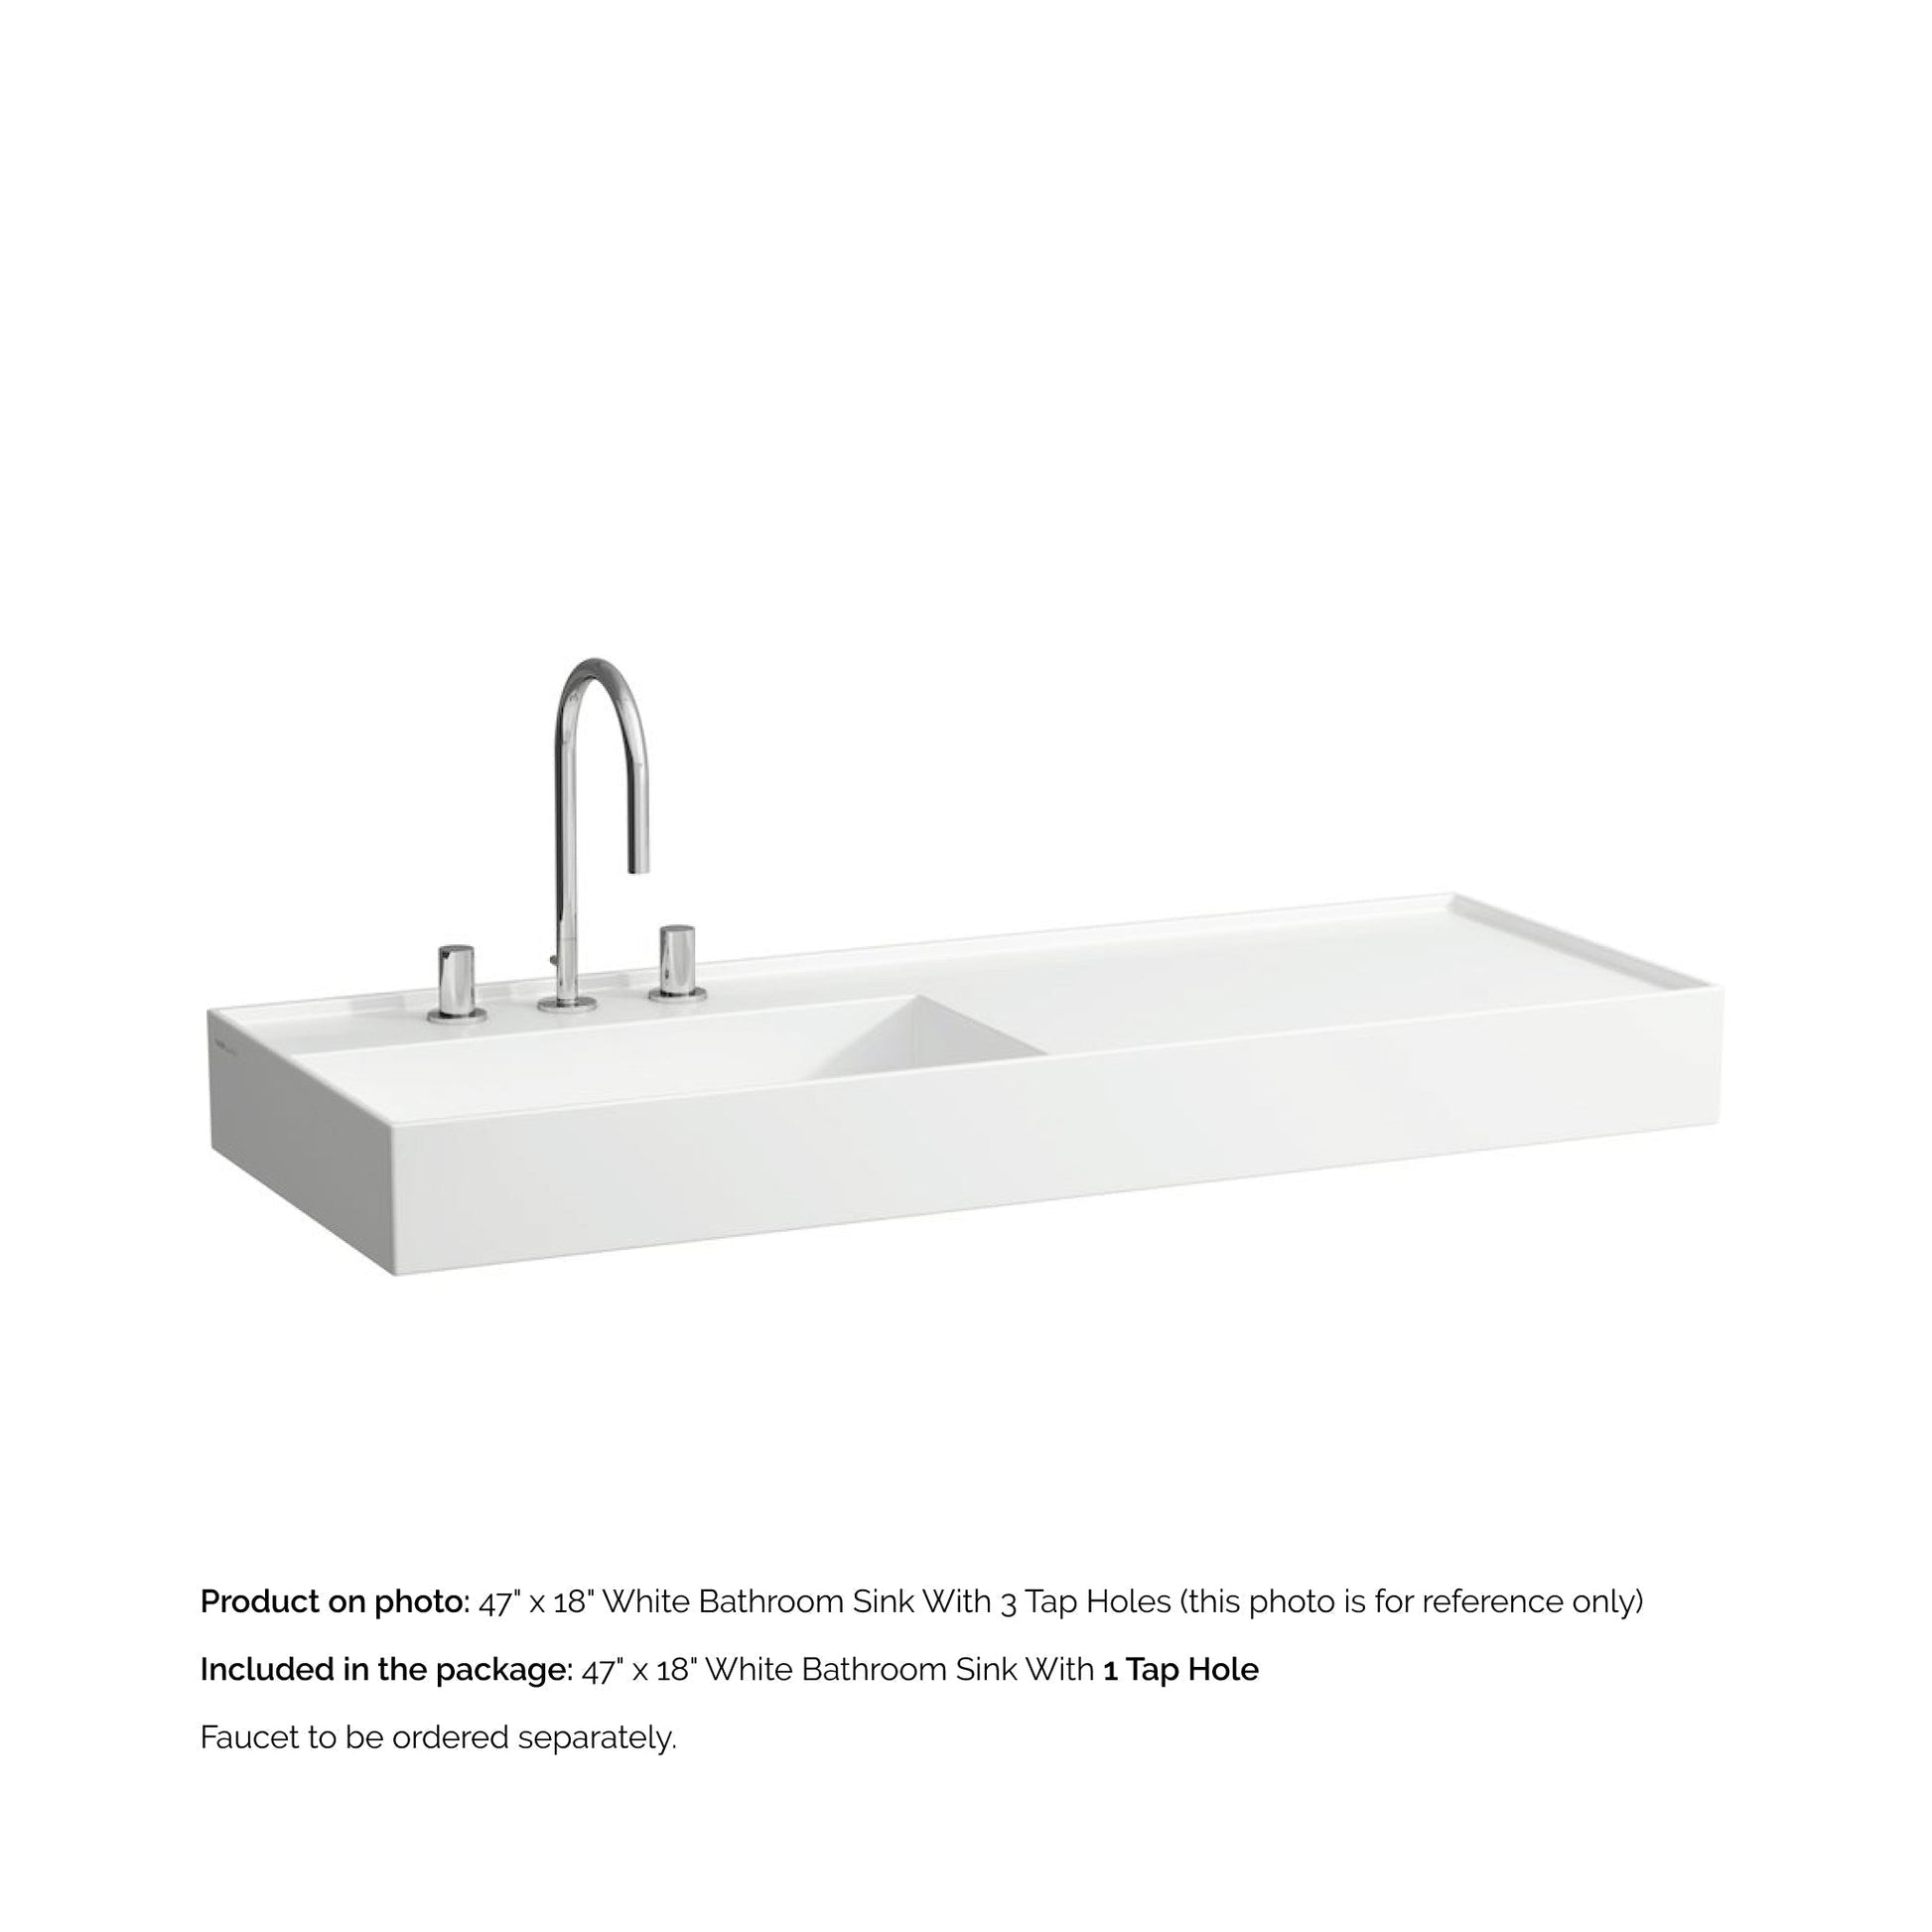 Laufen Kartell 47" x 18" White Wall-Mounted Shelf-Right Bathroom Sink With Faucet Hole